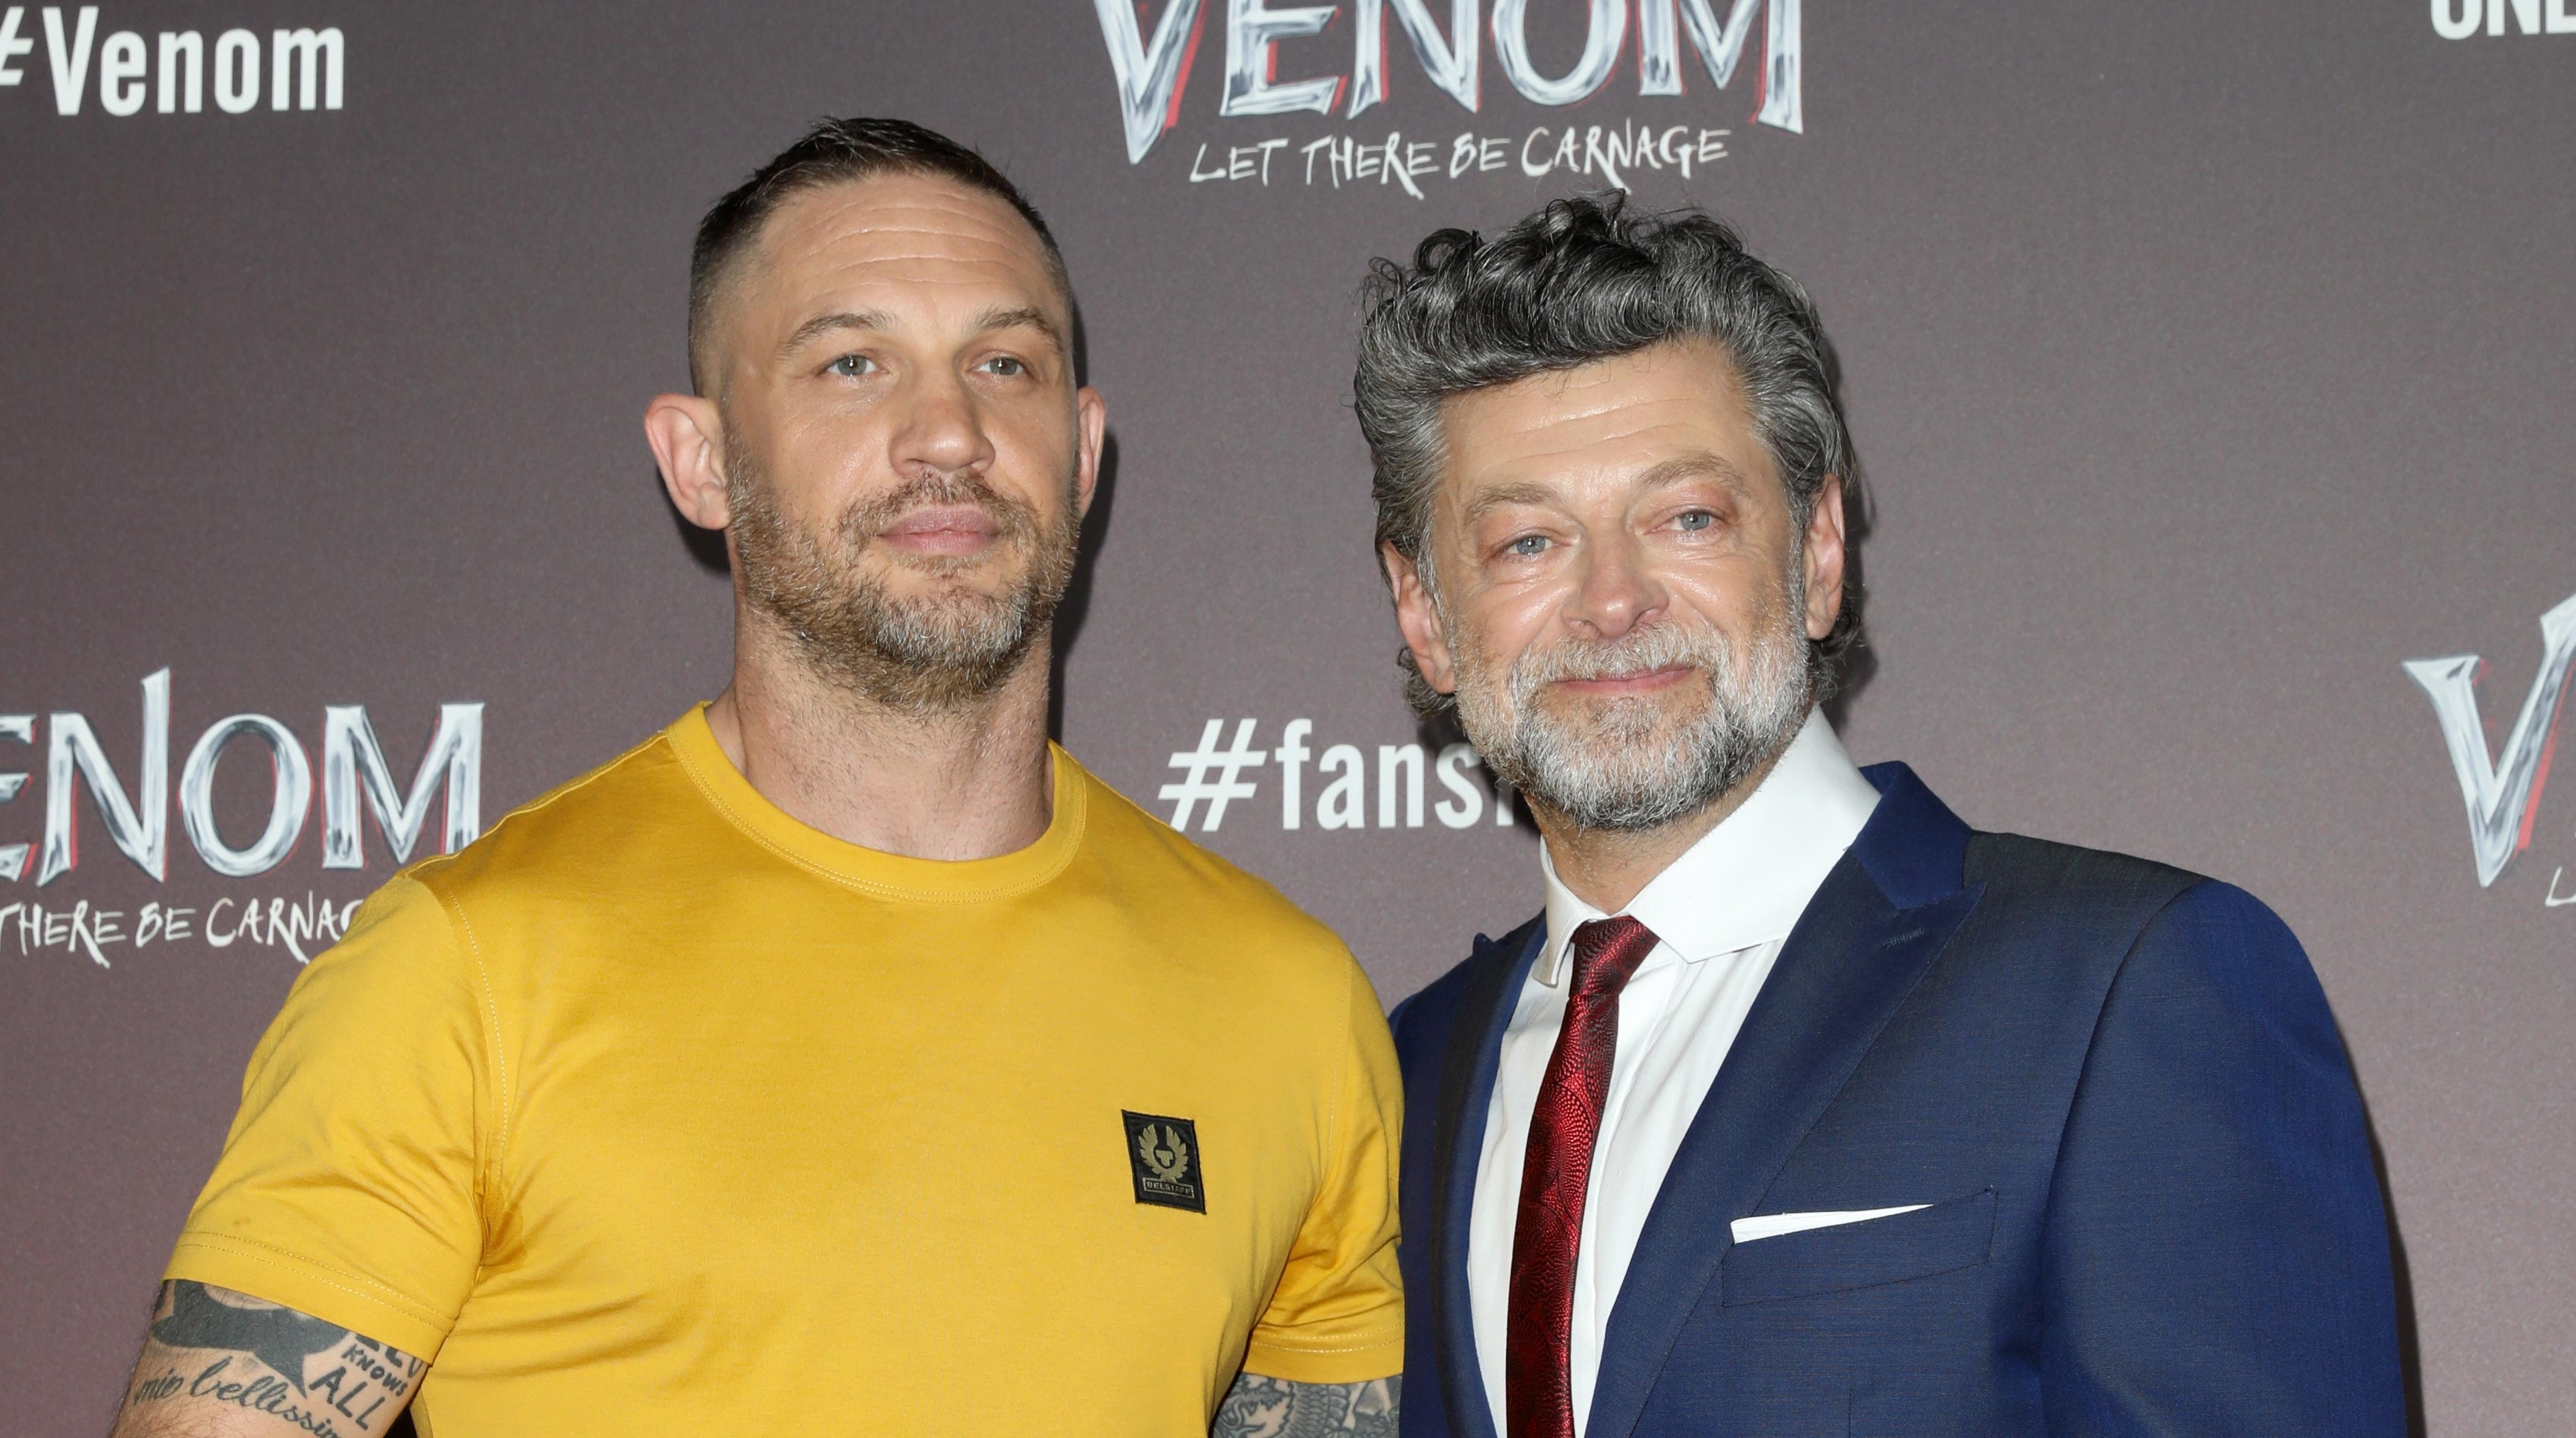 Relax, Andy Serkis says the Venom and Spider-Man reunion will happen eventually